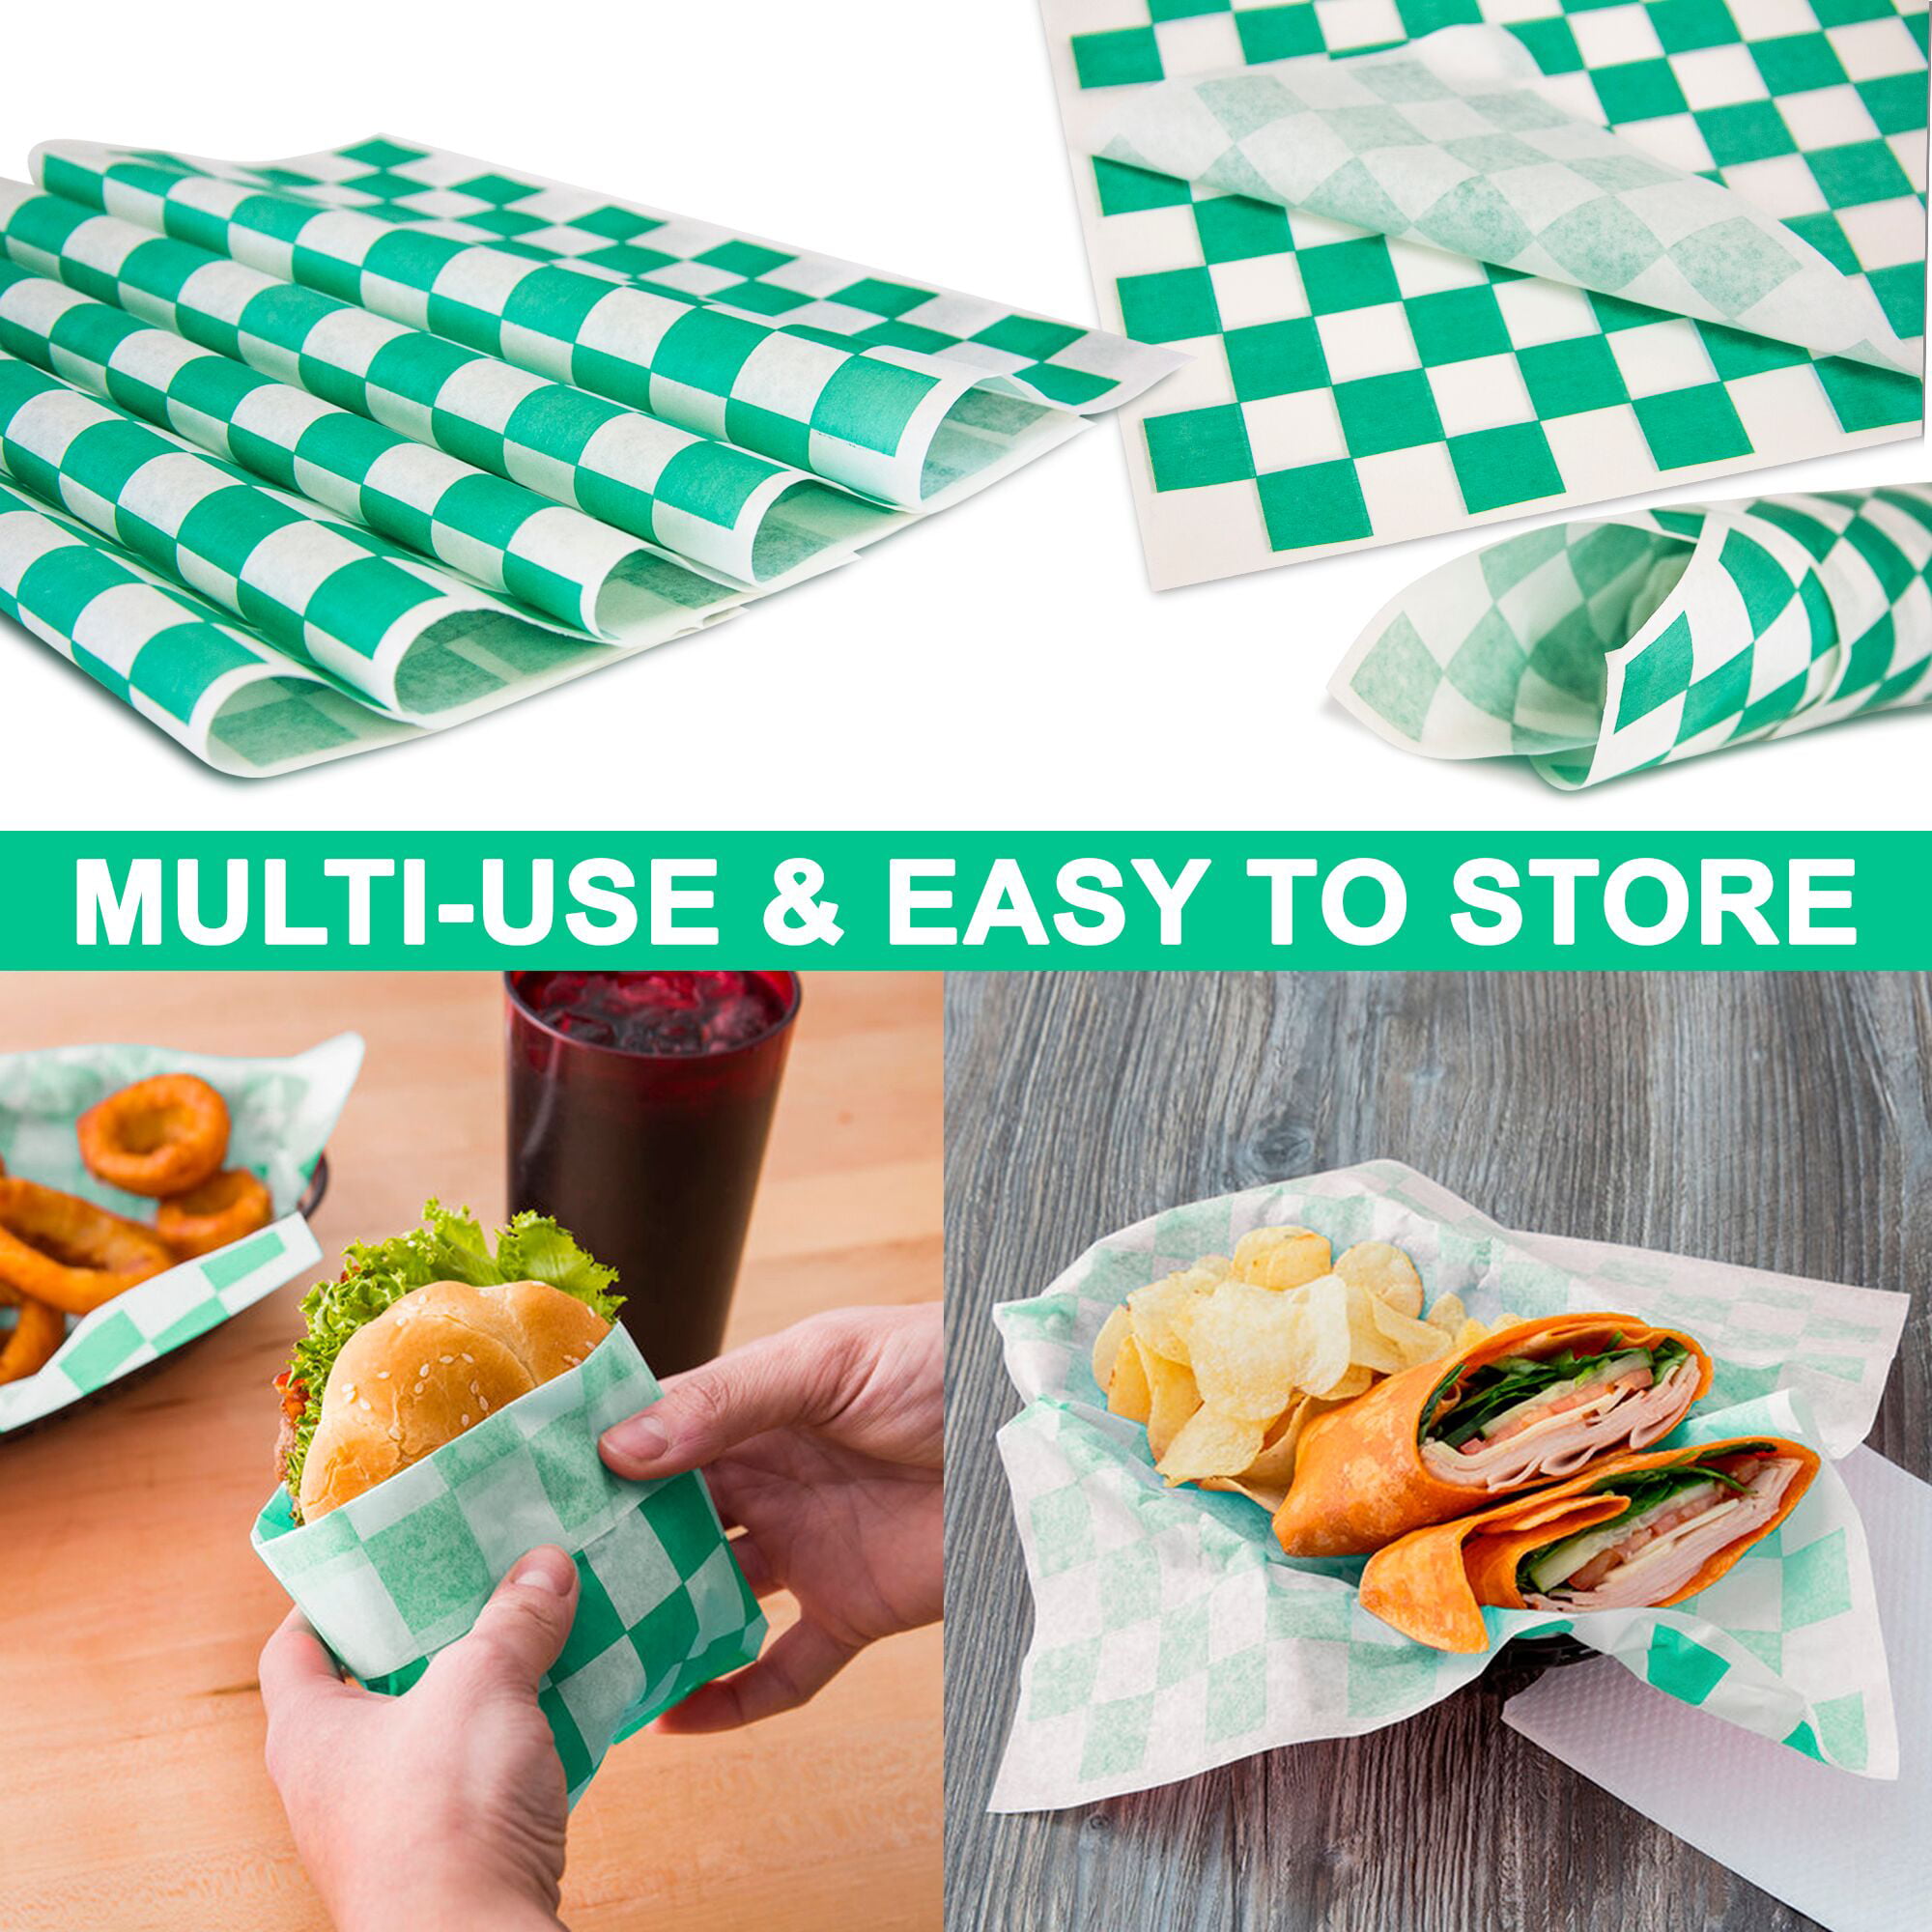 5000 Sheets] 12x12 Inch Deli Paper Sheets Sandwich Wrap - Green and White  Checkered Food Basket Liners, Grease Resistant Wrapper for Barbecue  Restaurants, Picnics, Parties, Kids Meal, Outdoor Fair 